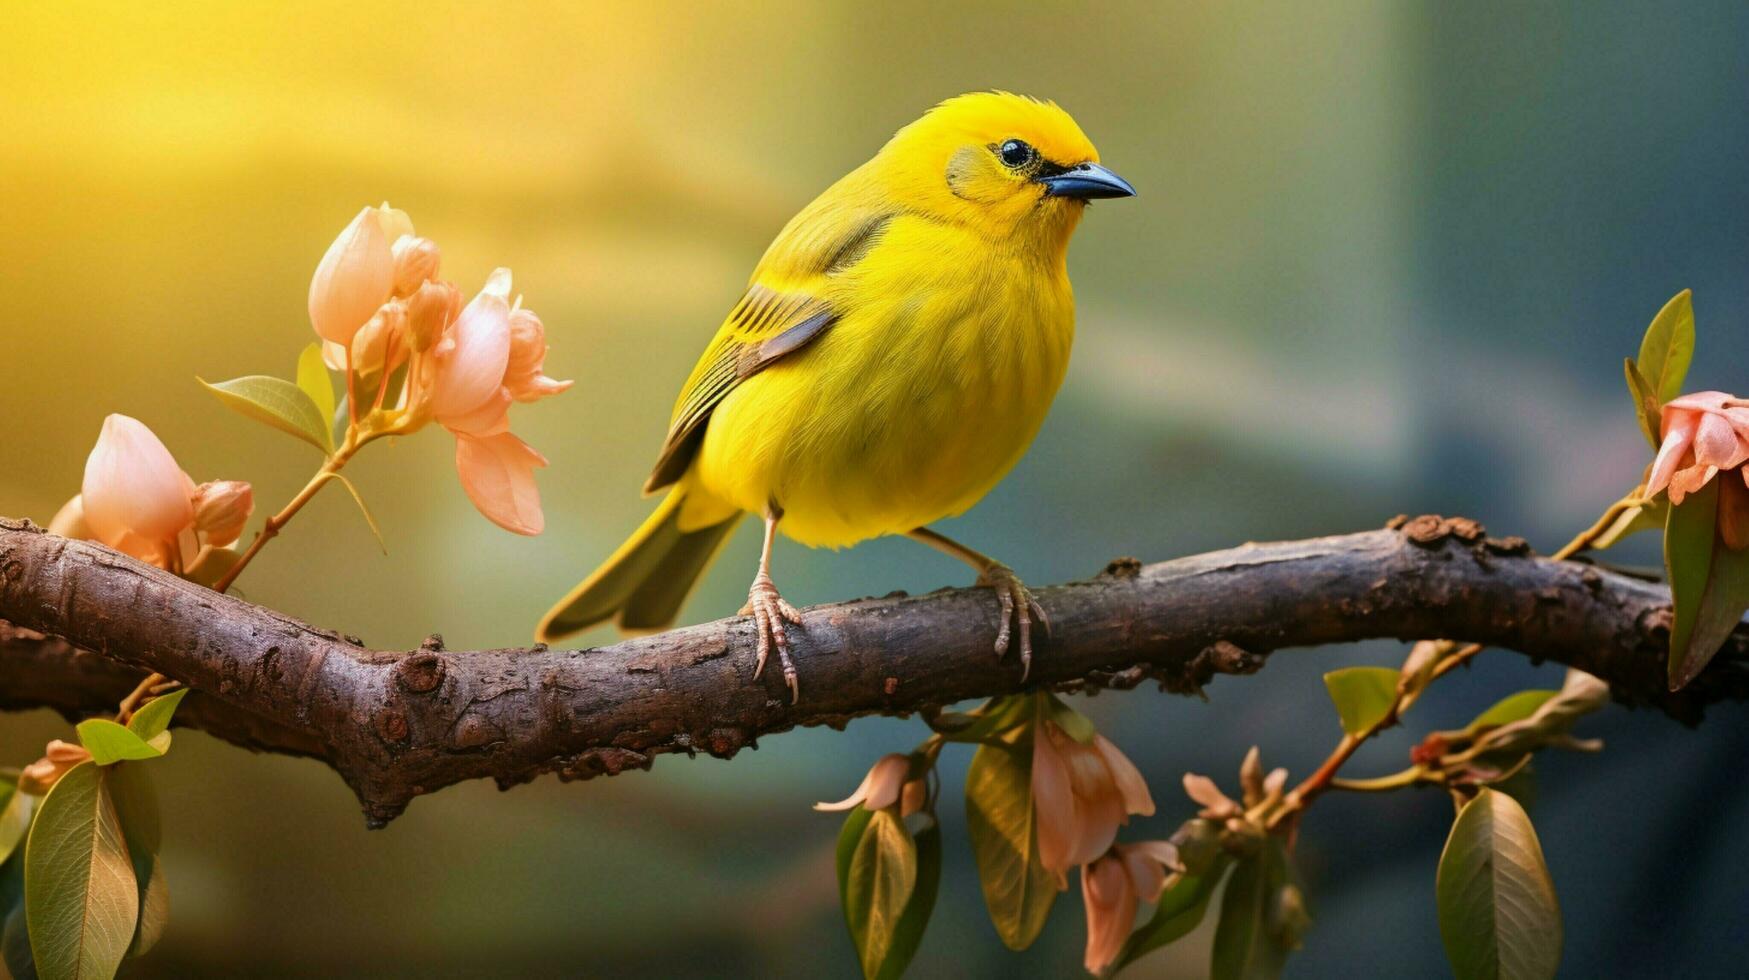 a cute yellow bird perching on a branch in nature photo